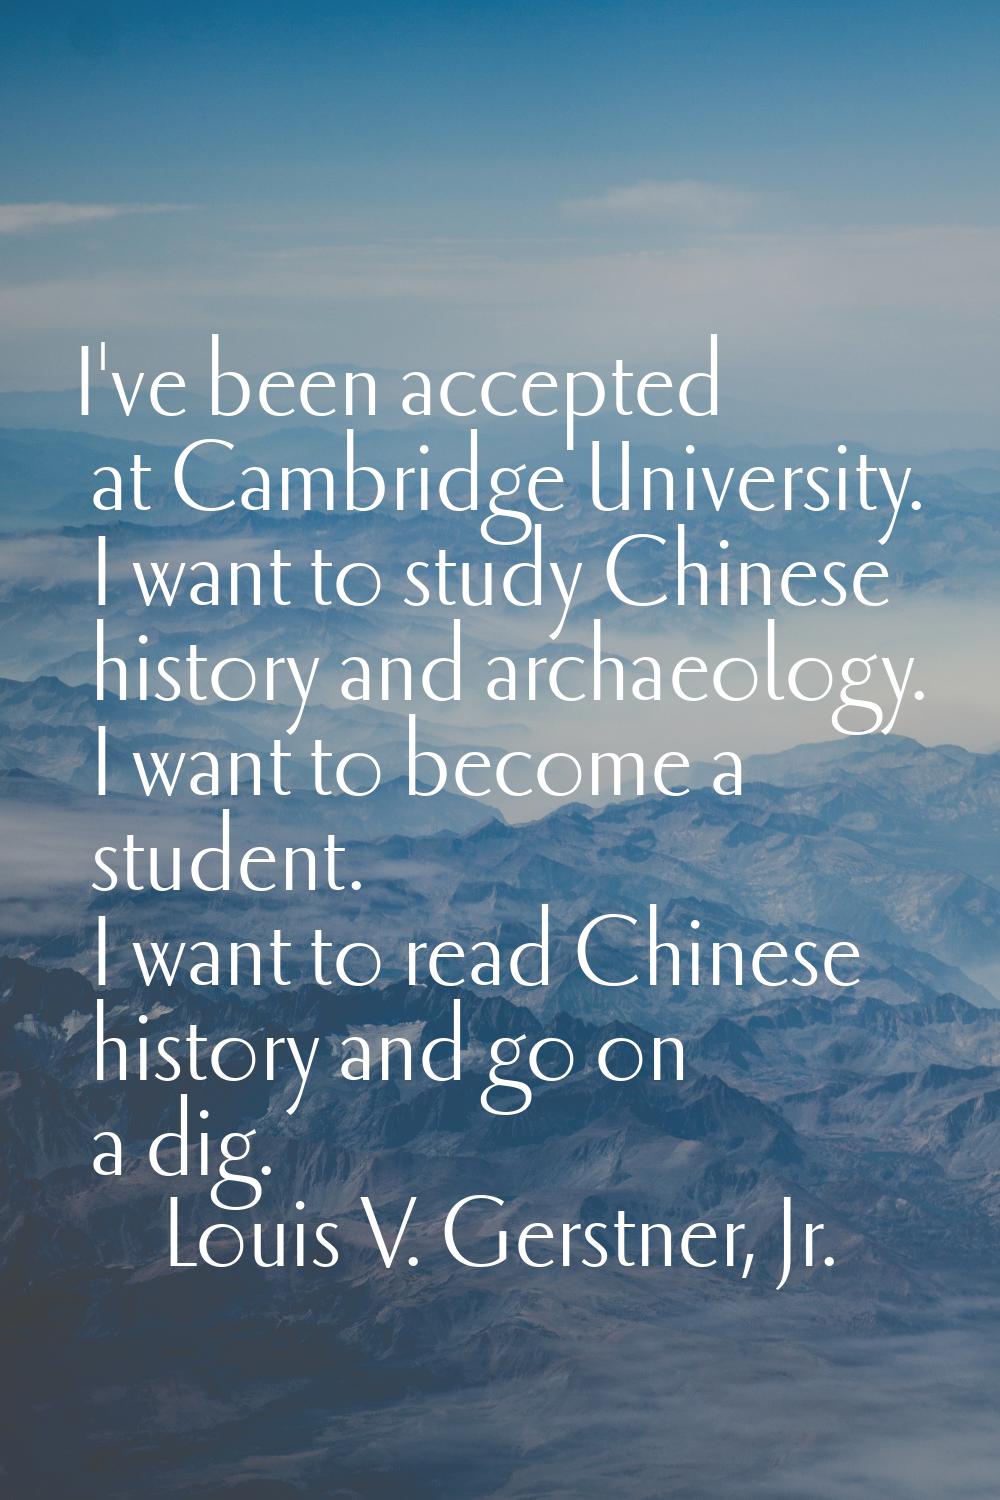 I've been accepted at Cambridge University. I want to study Chinese history and archaeology. I want